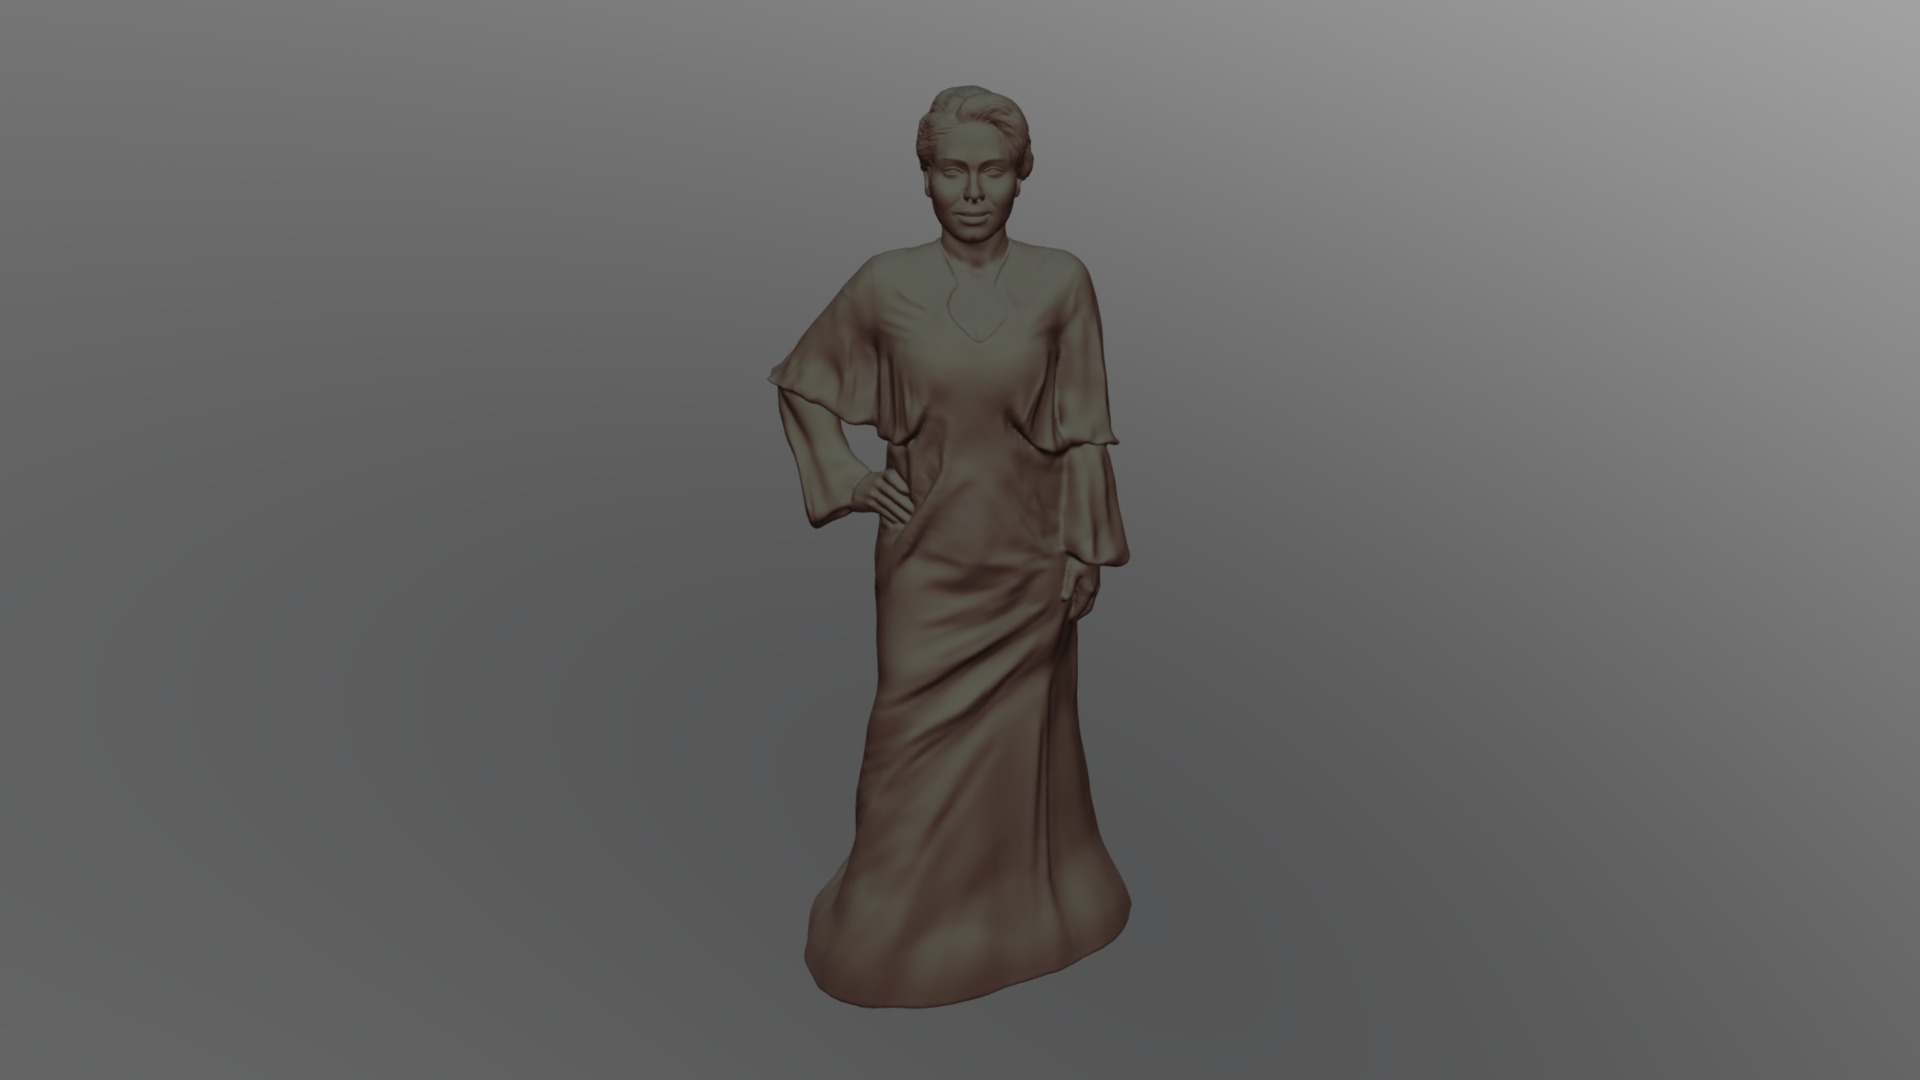 3D model Adele 3D printing ready - This is a 3D model of the Adele 3D printing ready. The 3D model is about a man in a dress.